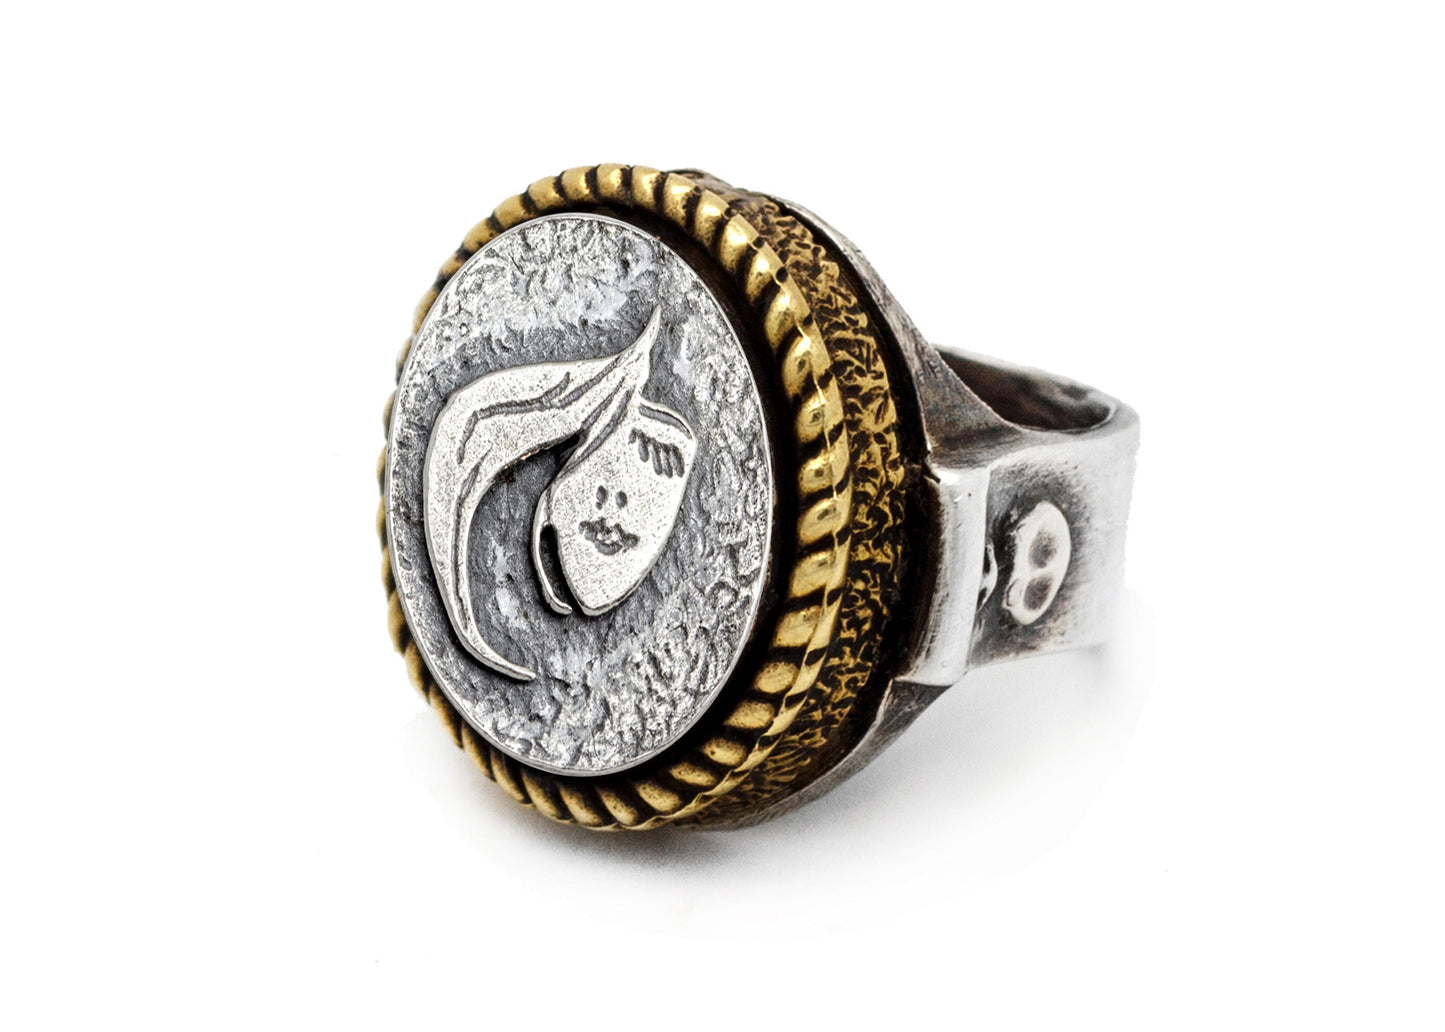 Coin ring with the Stylish Face coin medallion